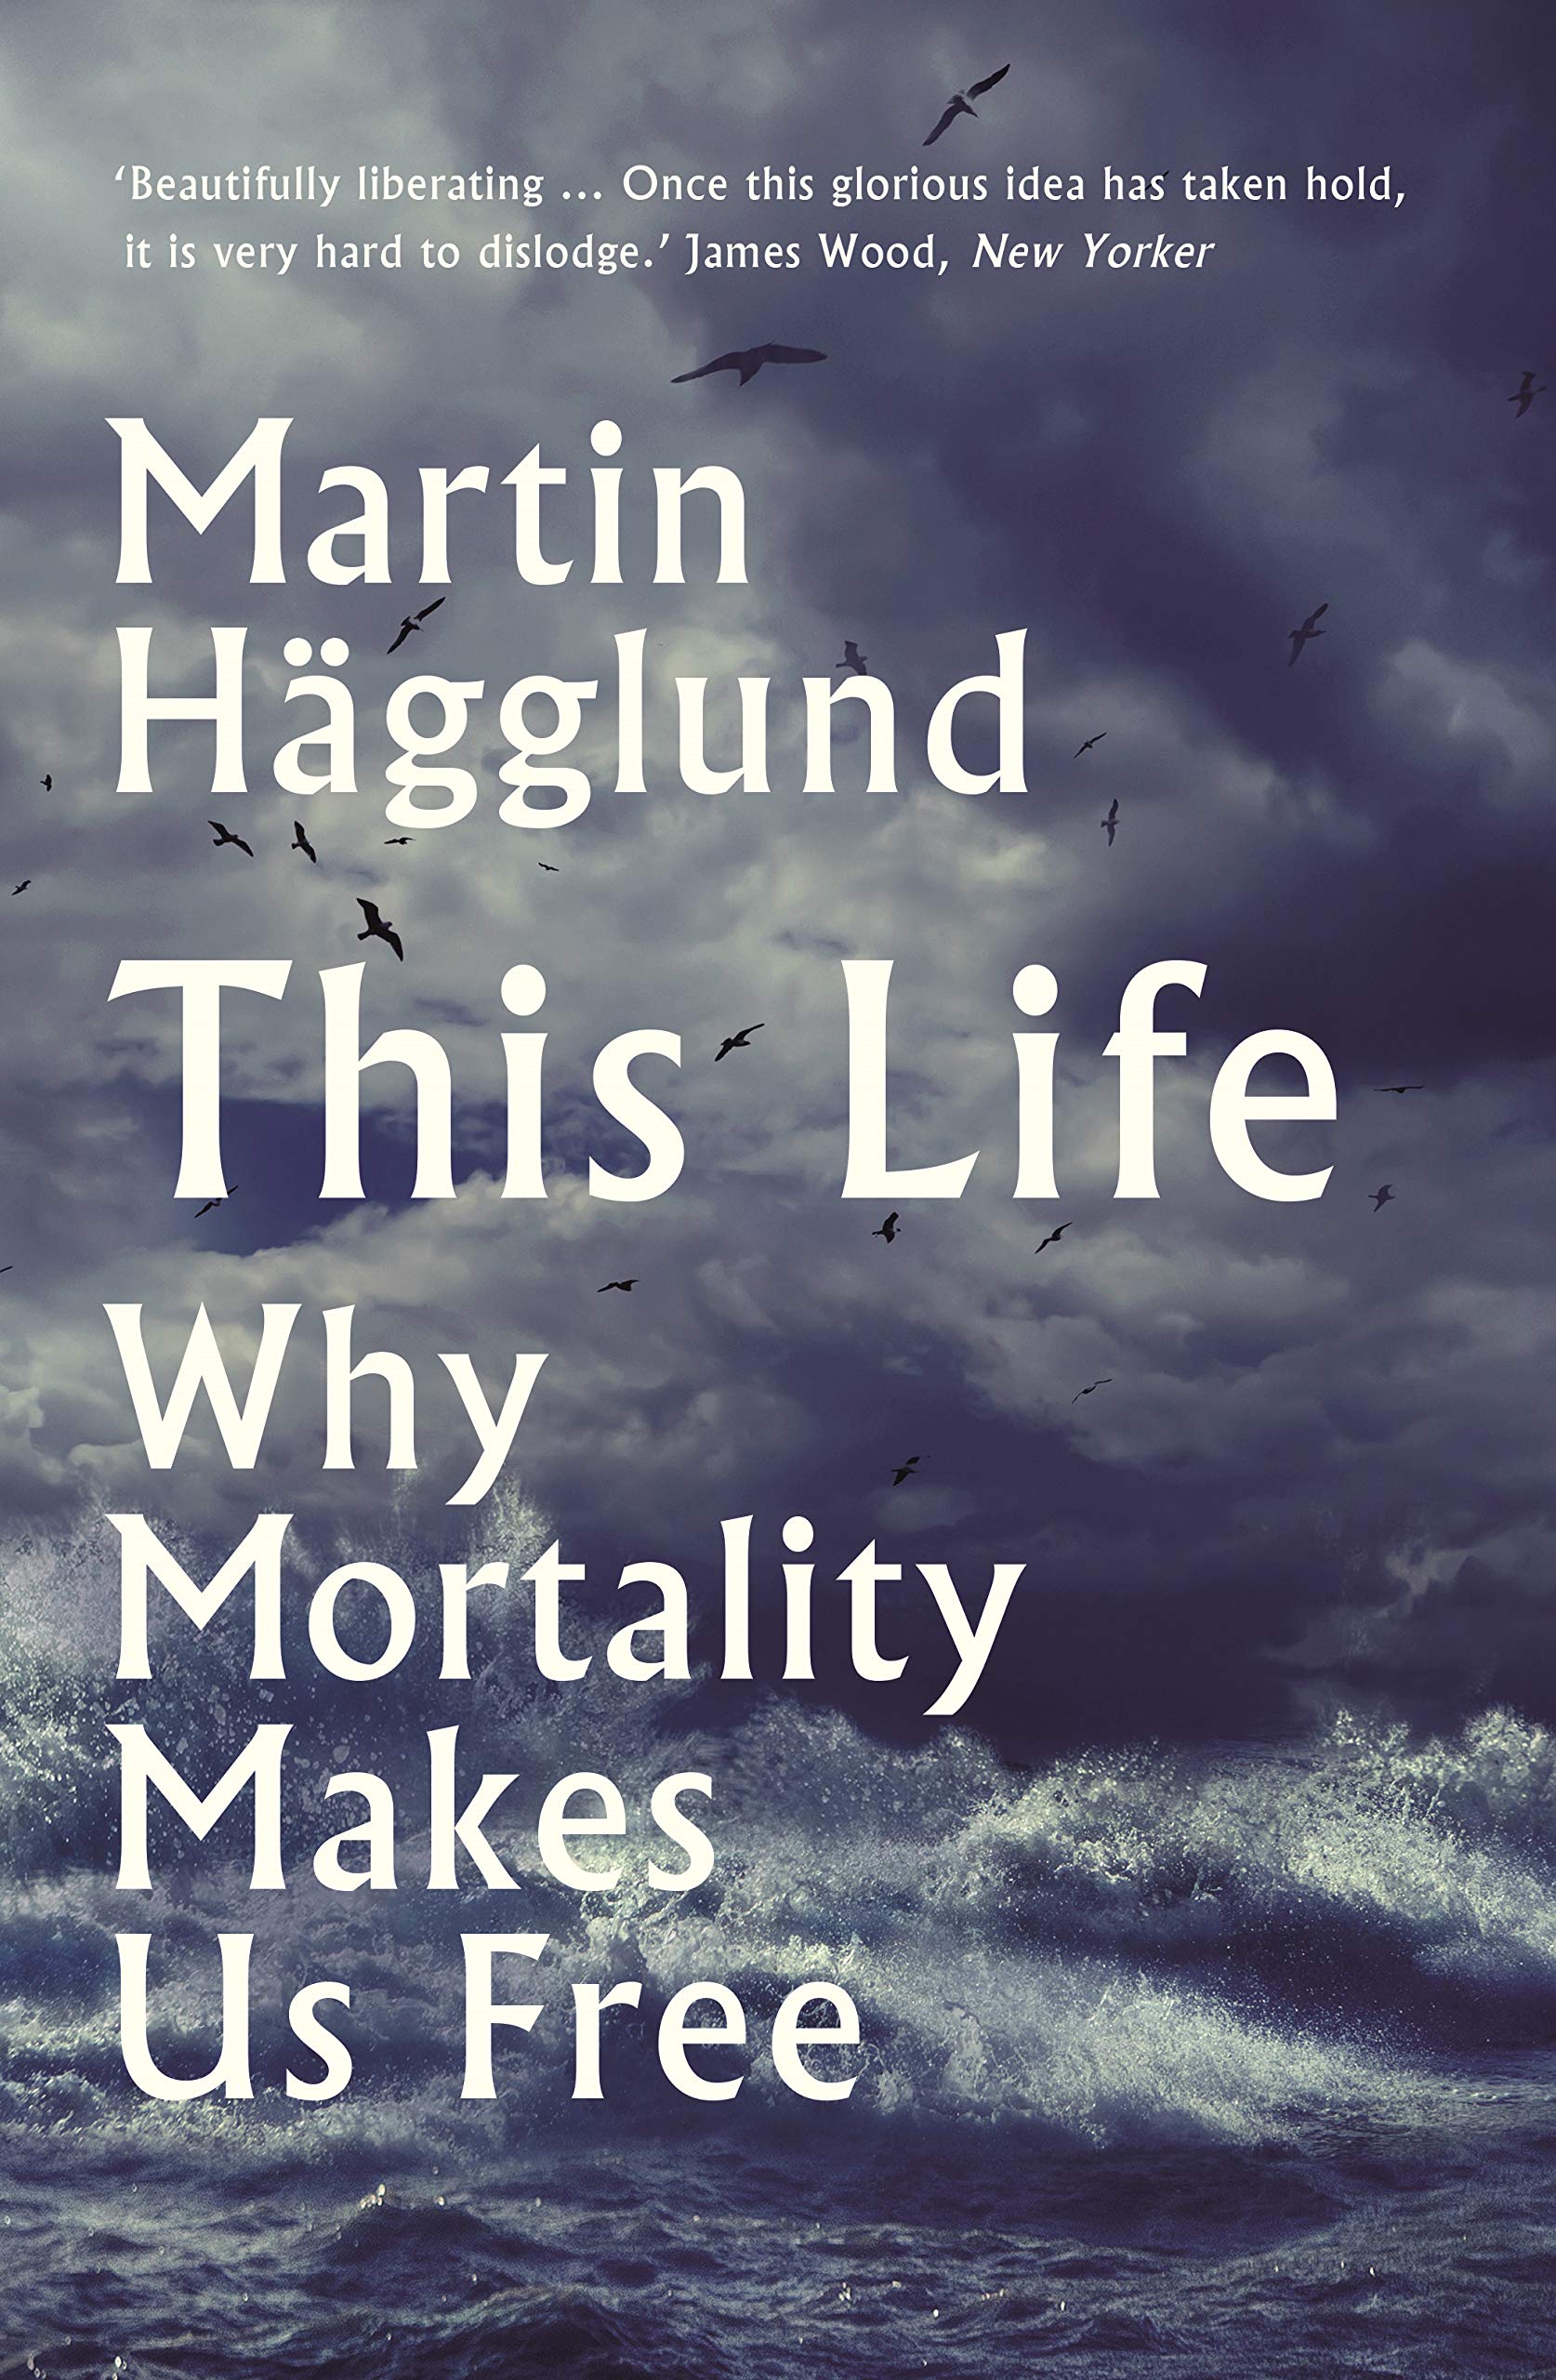 Martin Hägglund: This Life - Why Mortality Makes Us Free